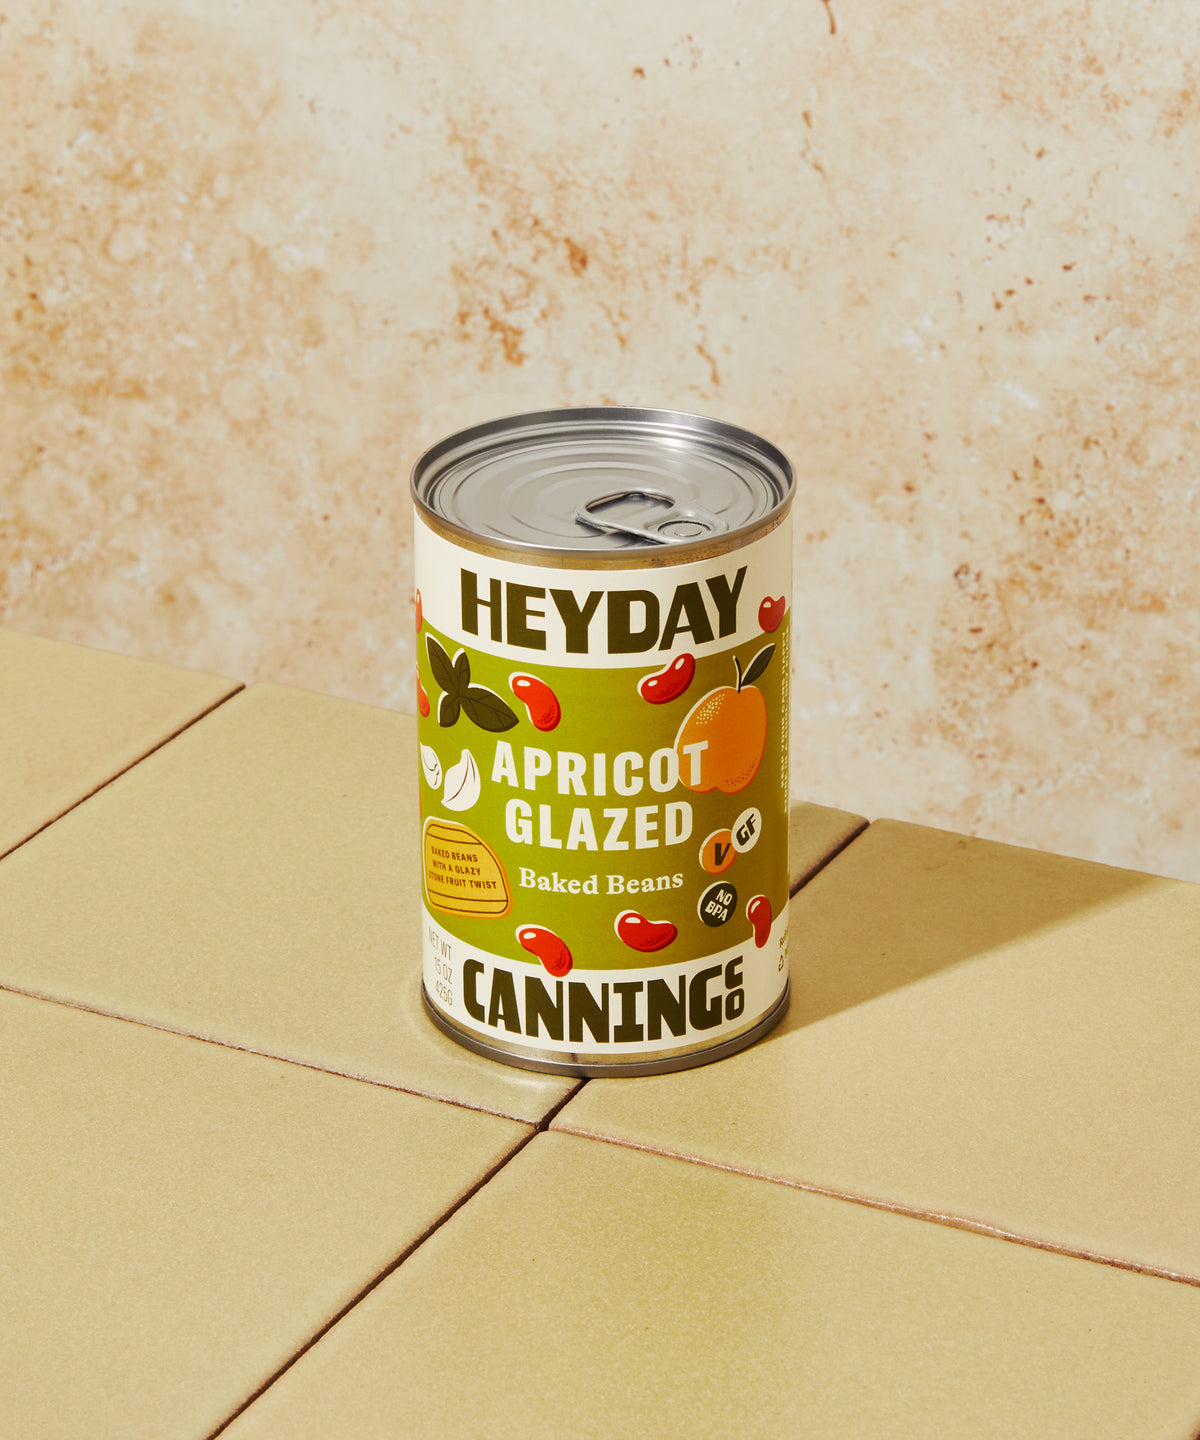 Heyday Canning Co. - Apricot Glazed Baked Beans